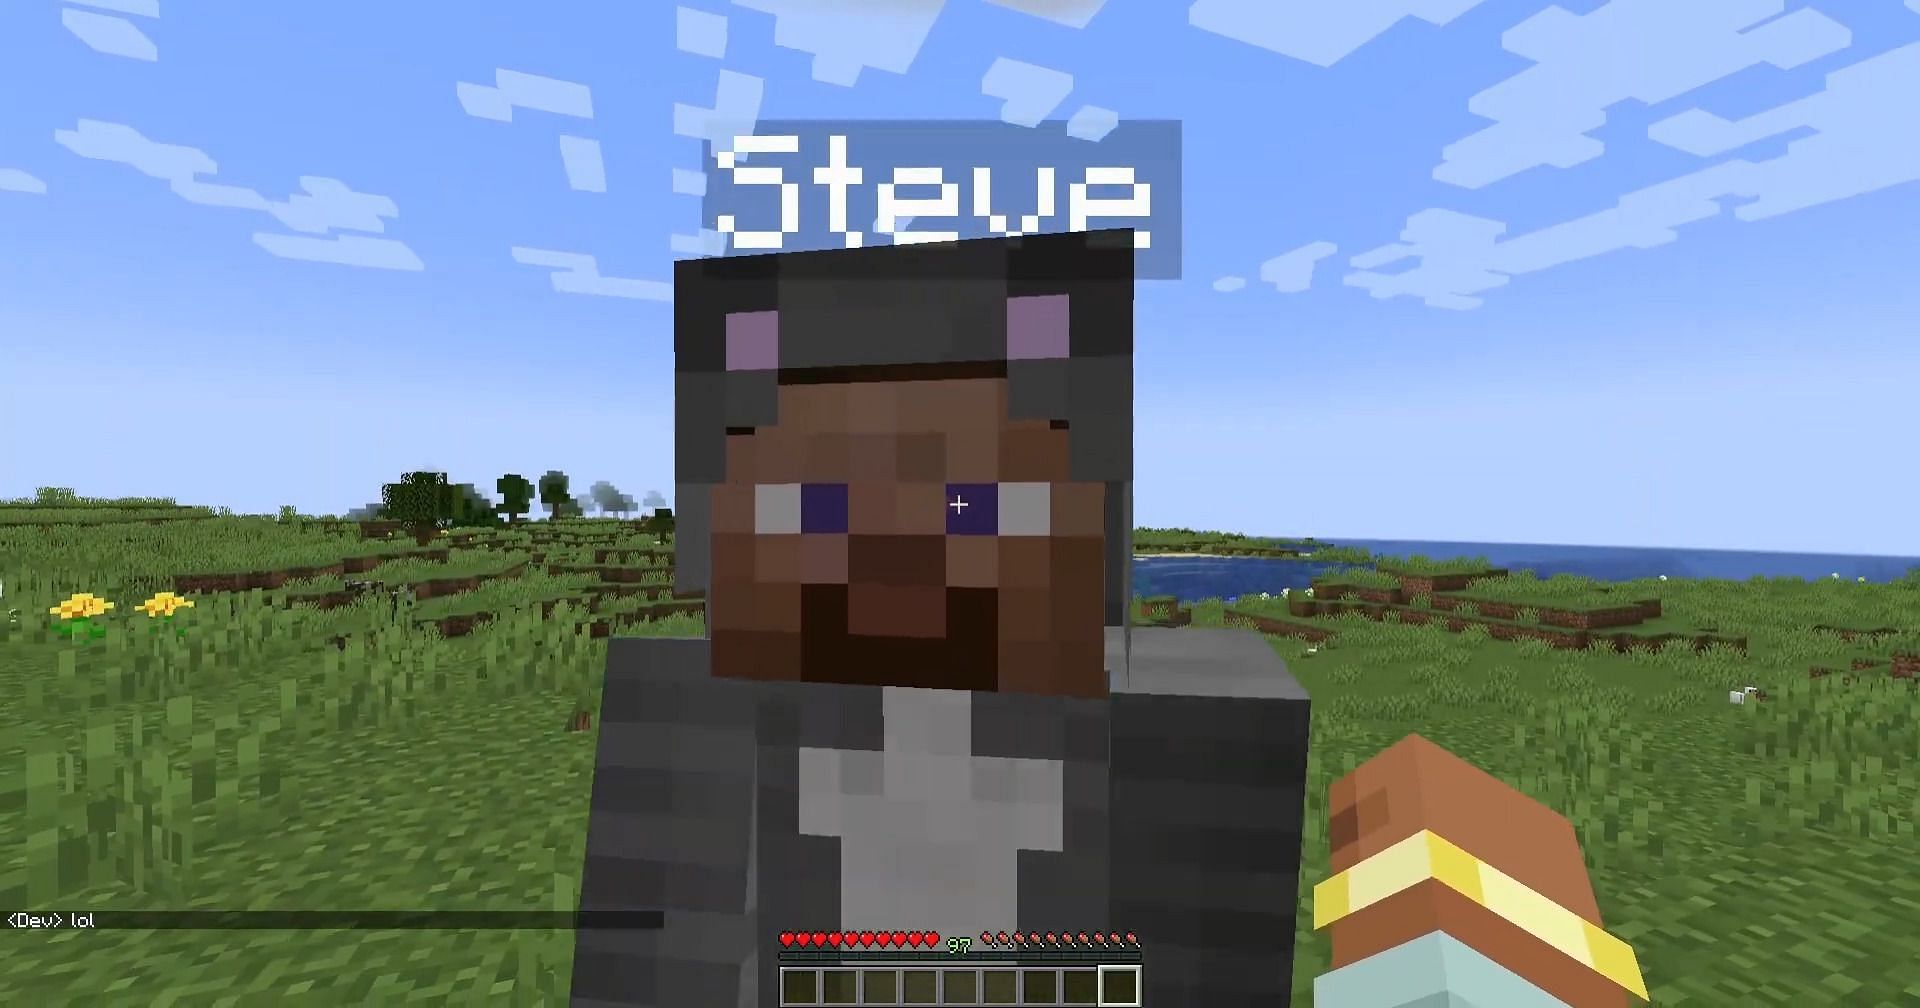 As the name implies, this mod allows players to create fake Minecraft players to inhabit their worlds (Image via Duzo/YouTube)